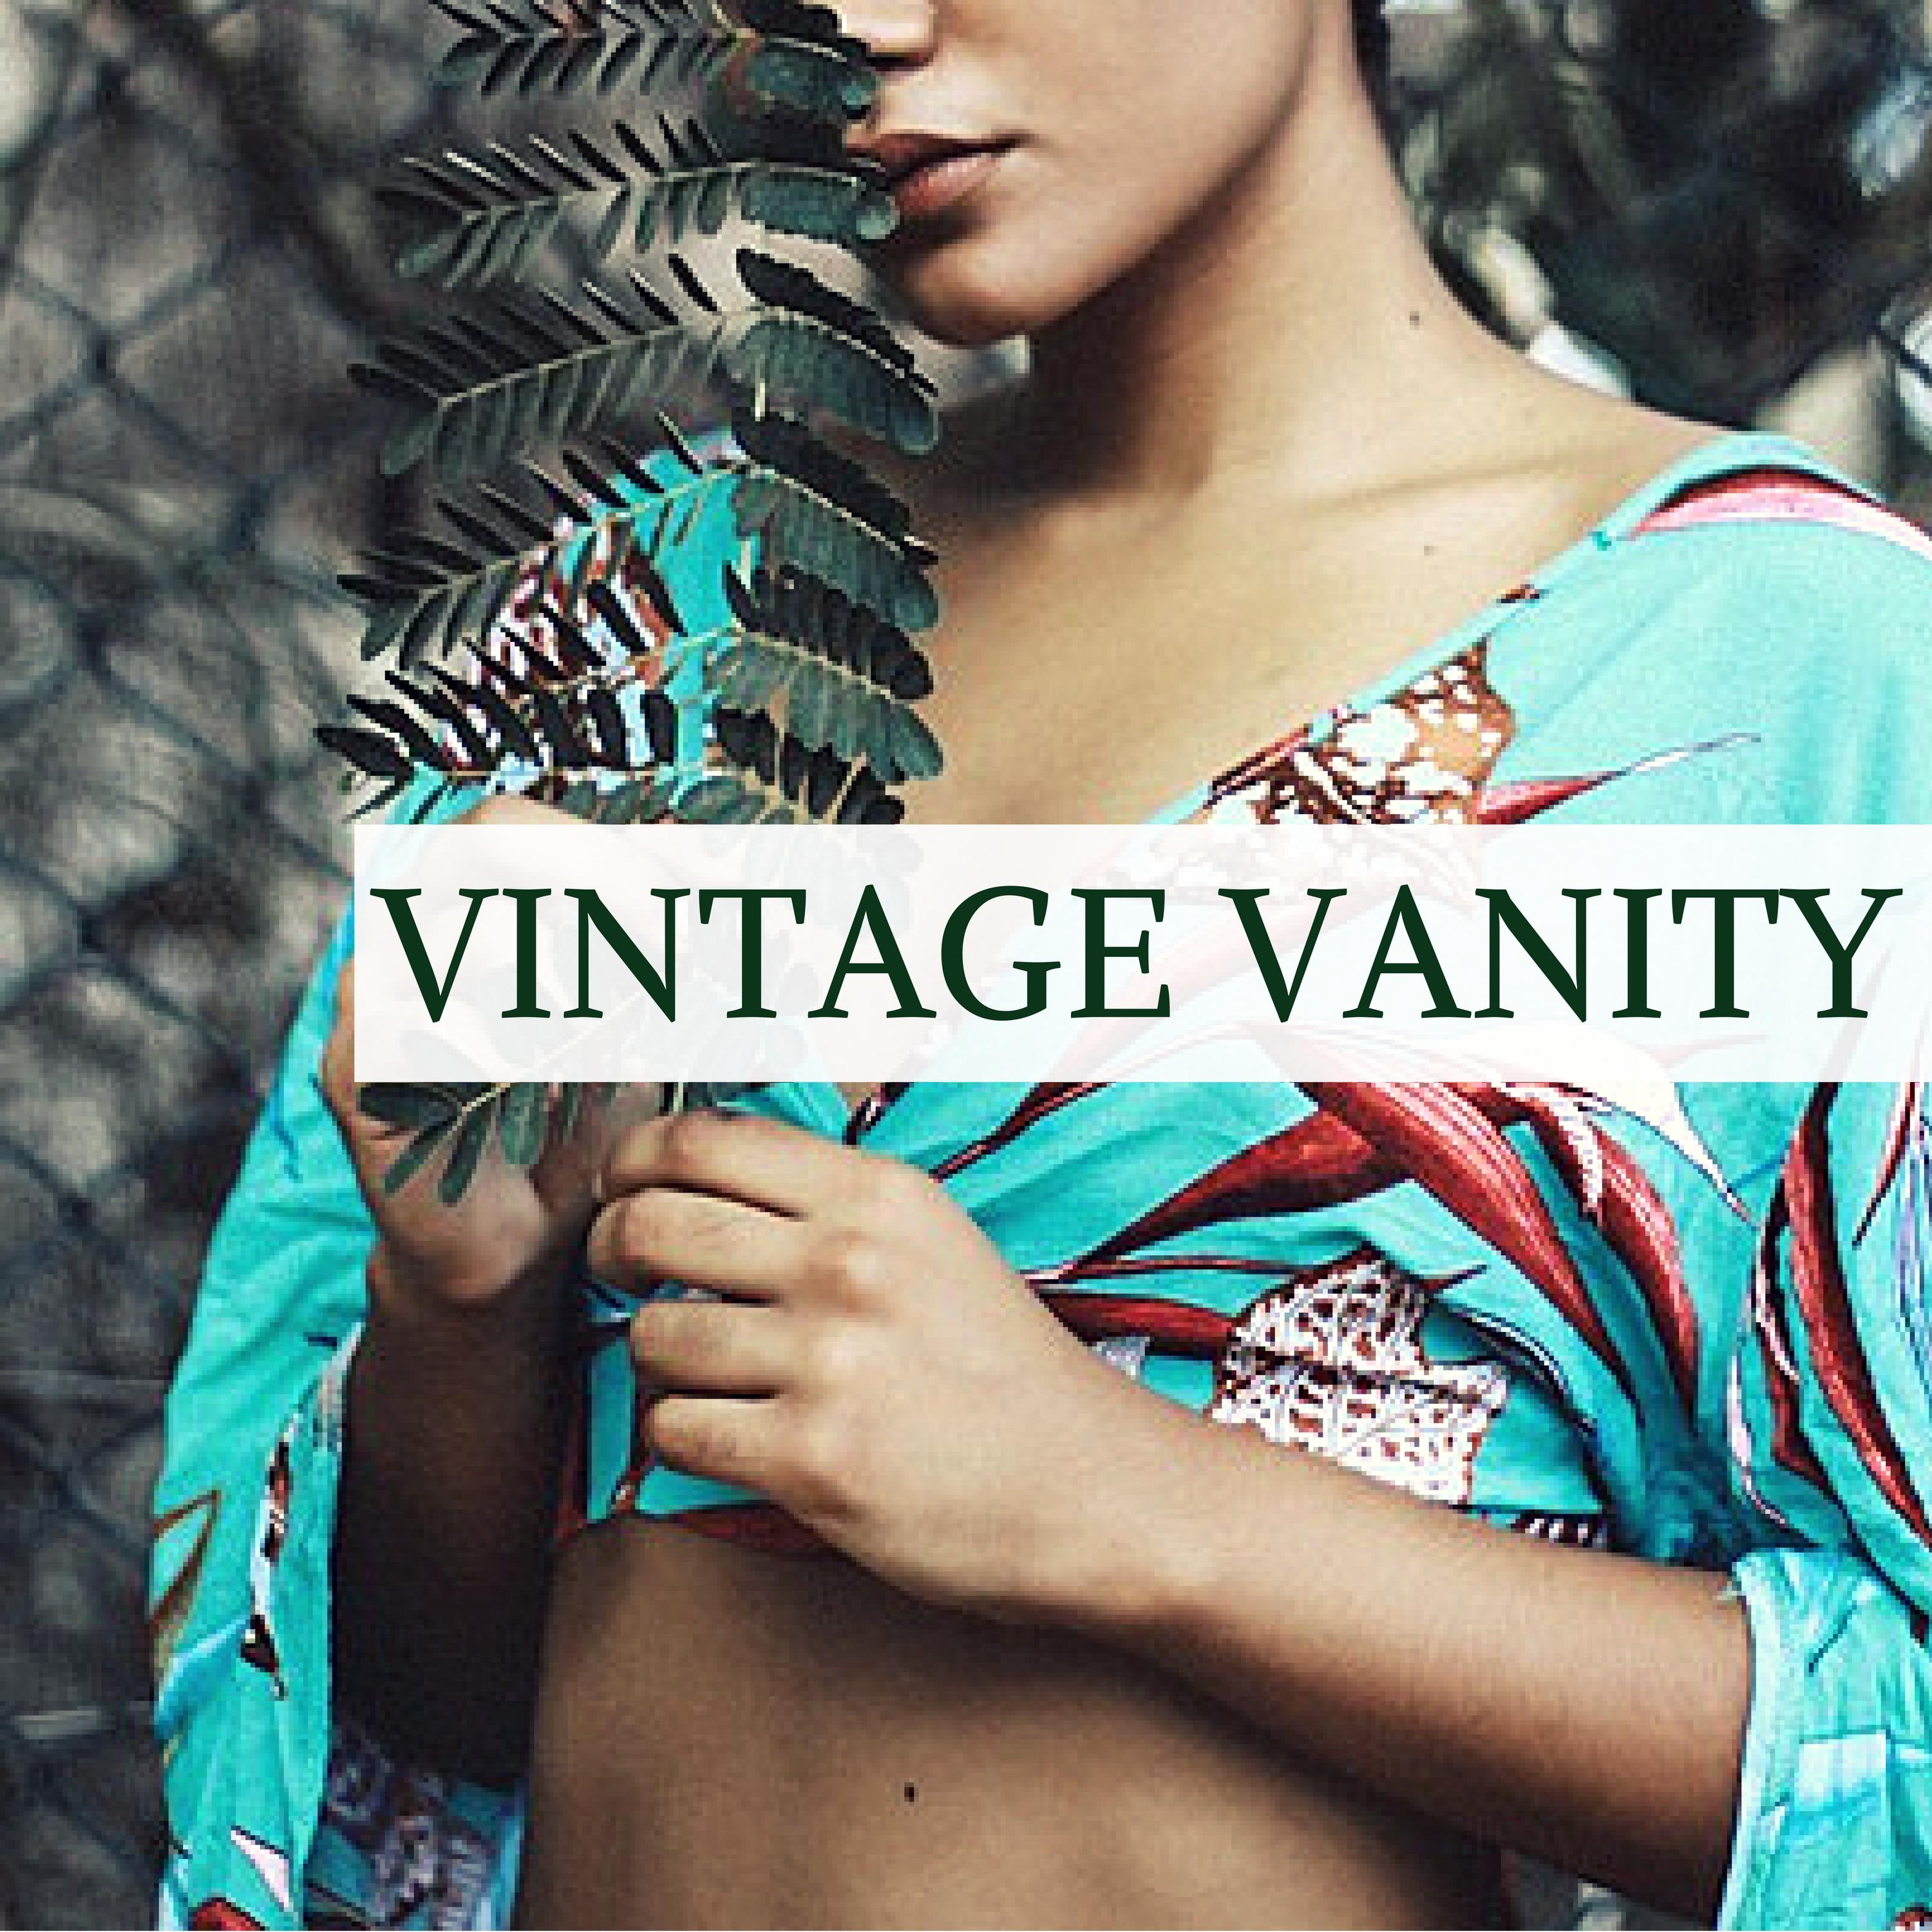 Vintage Vanity - Ultimate Retro Lounge Music for Total Relaxation and Vintage Cafe